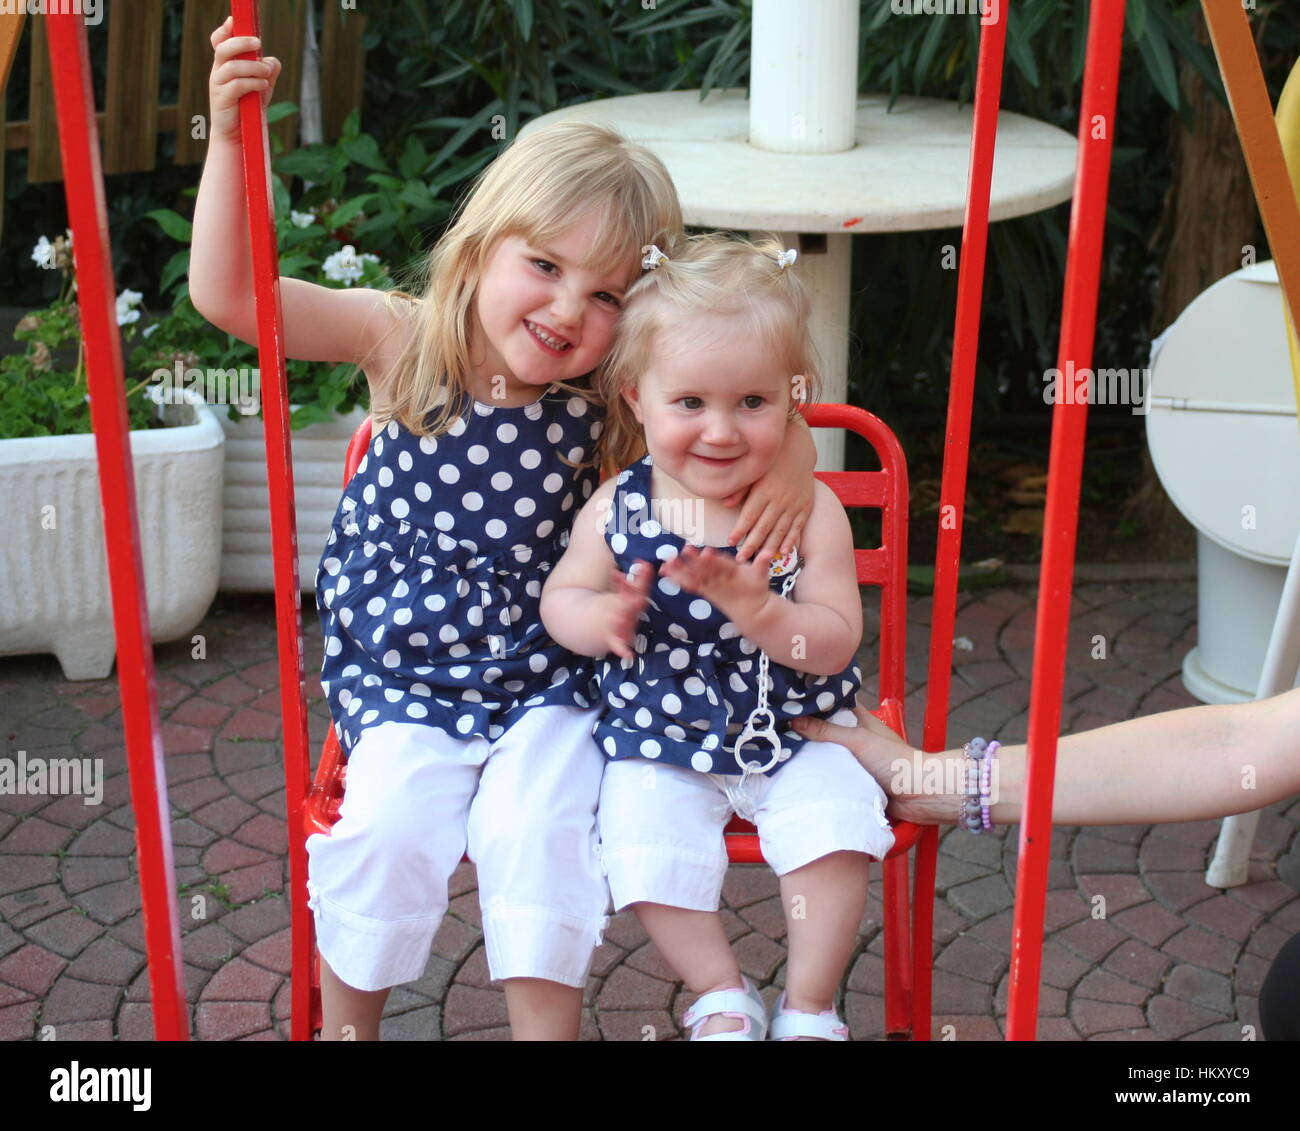 Sisters on a swing, sibling connection, sibling love, family fun, blonde little girls, childhood concept Stock Photo